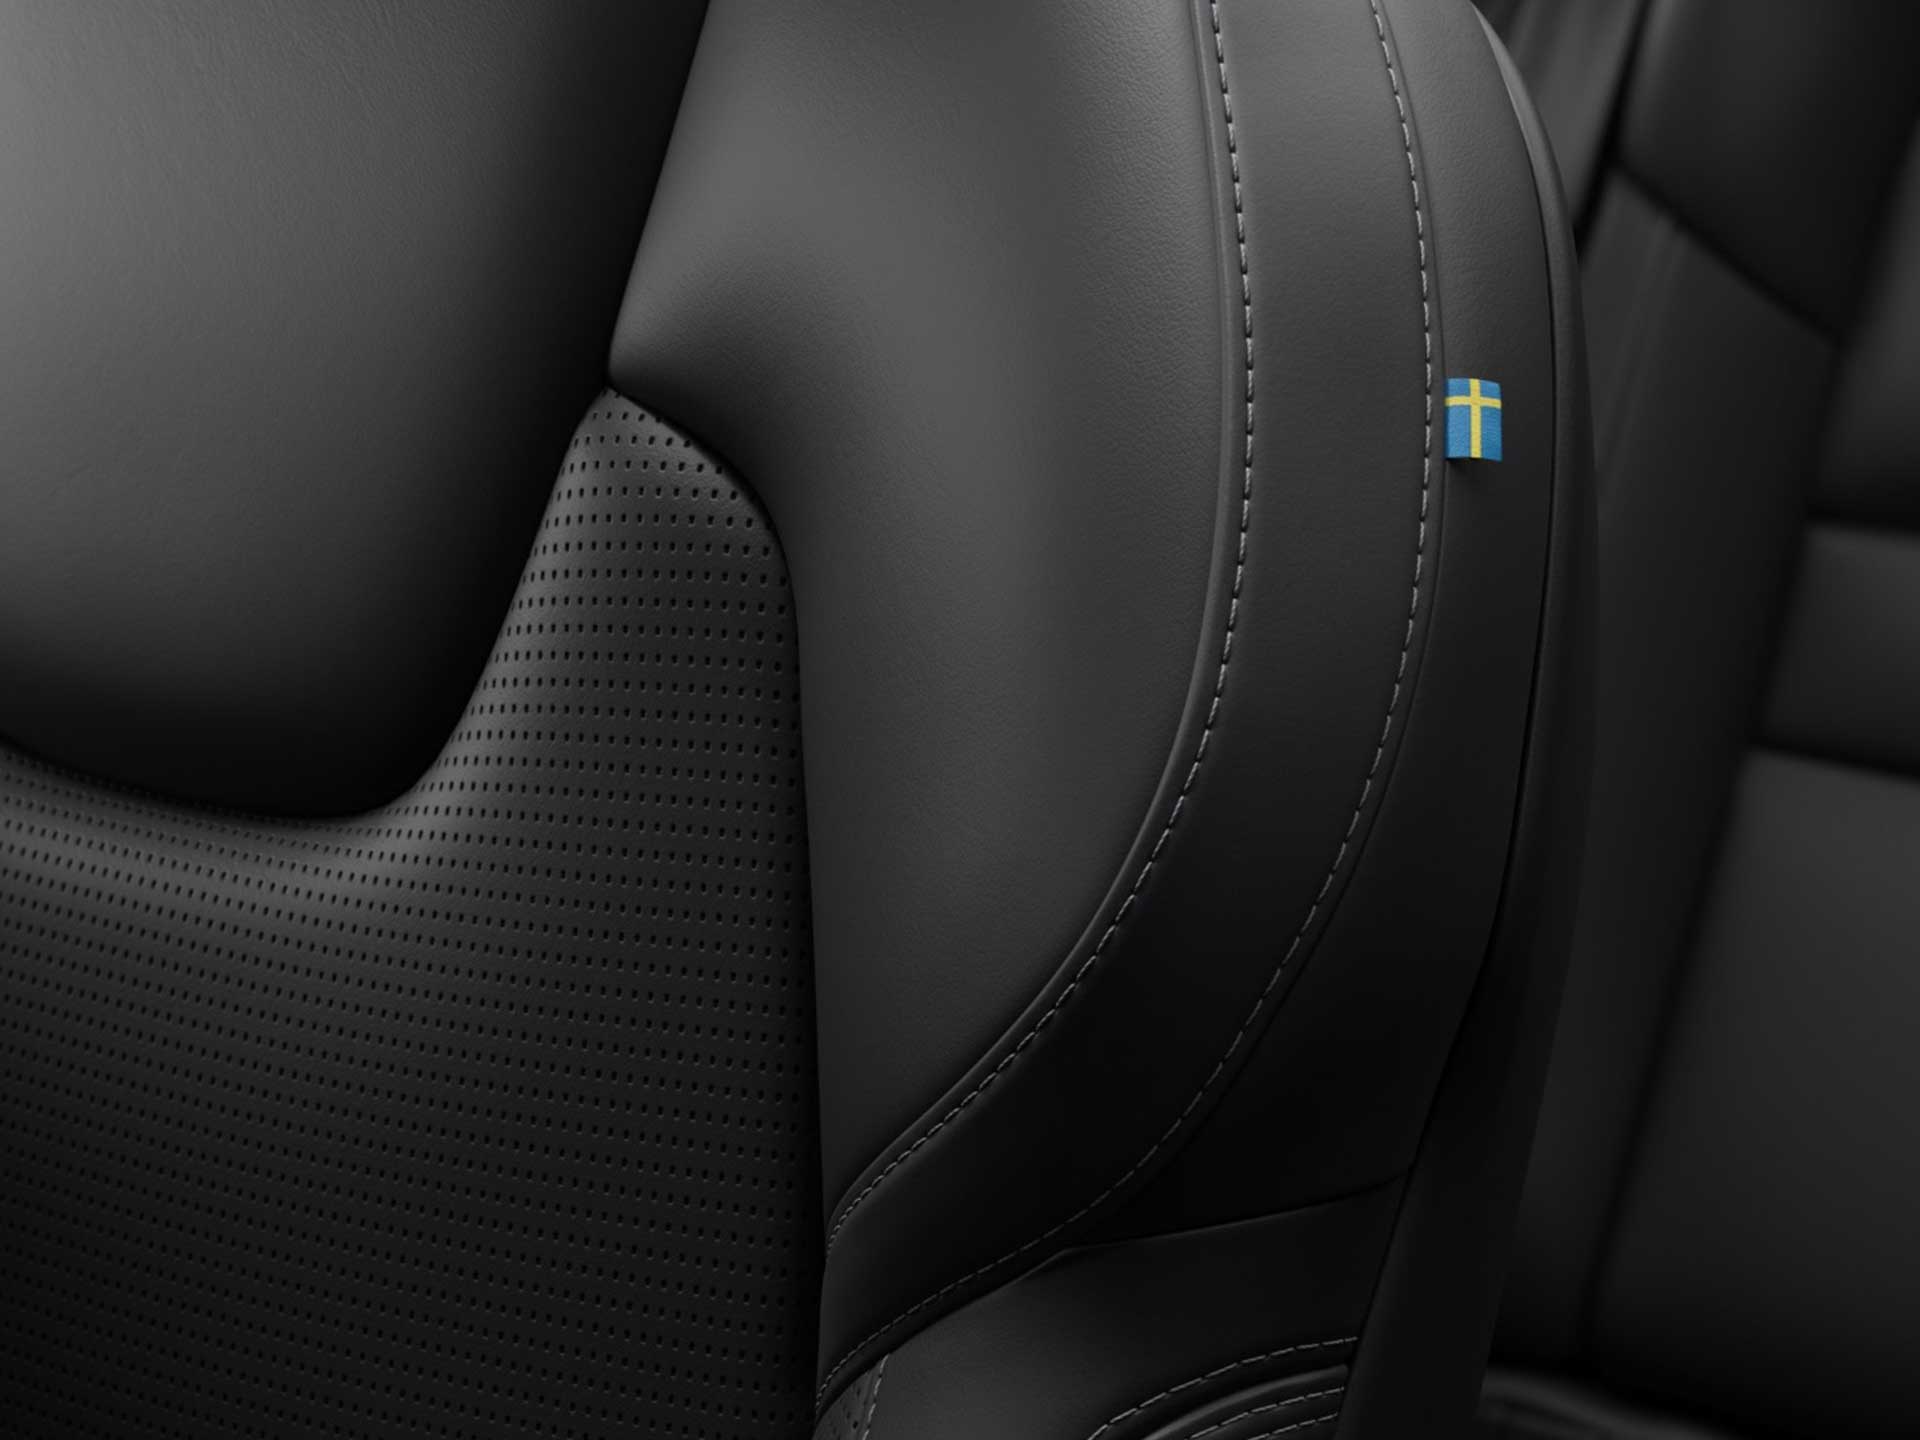 Nappa leather front seats in a Volvo S60 sedan.